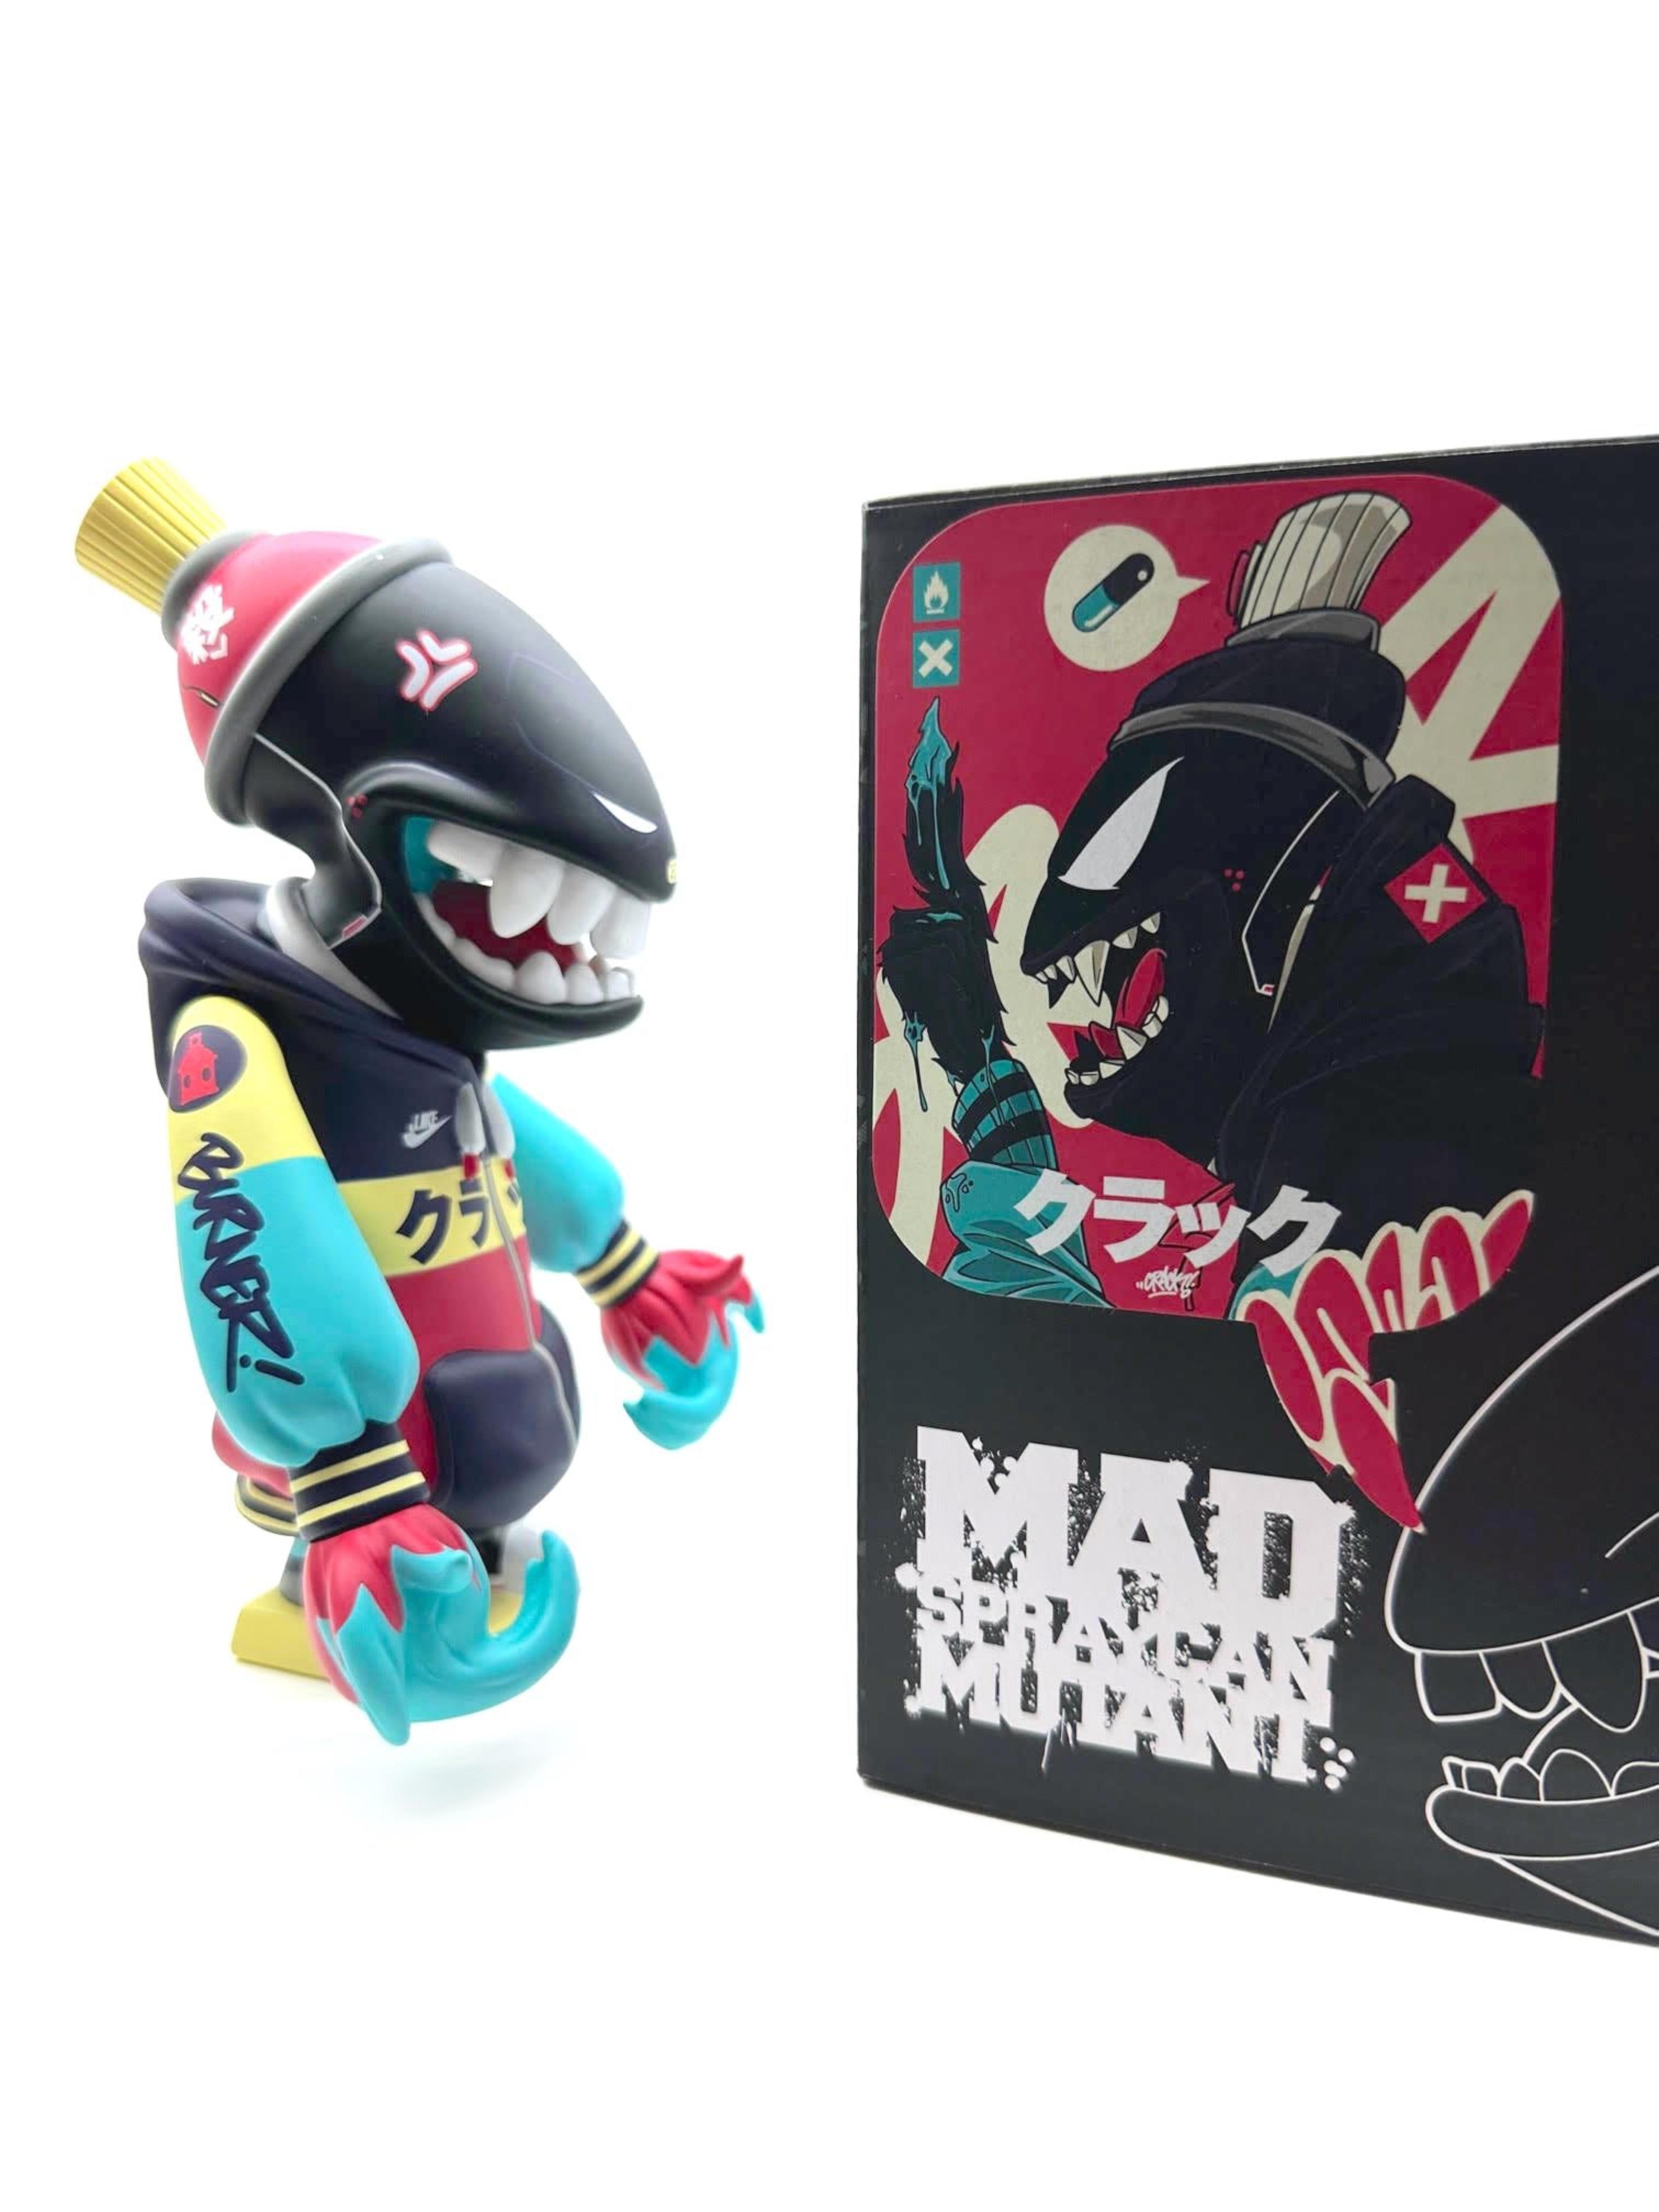 Alternate View 9 of "The Can" Mad Spraycan Mutant by x Crack x Jeremy MadL  x  Marti